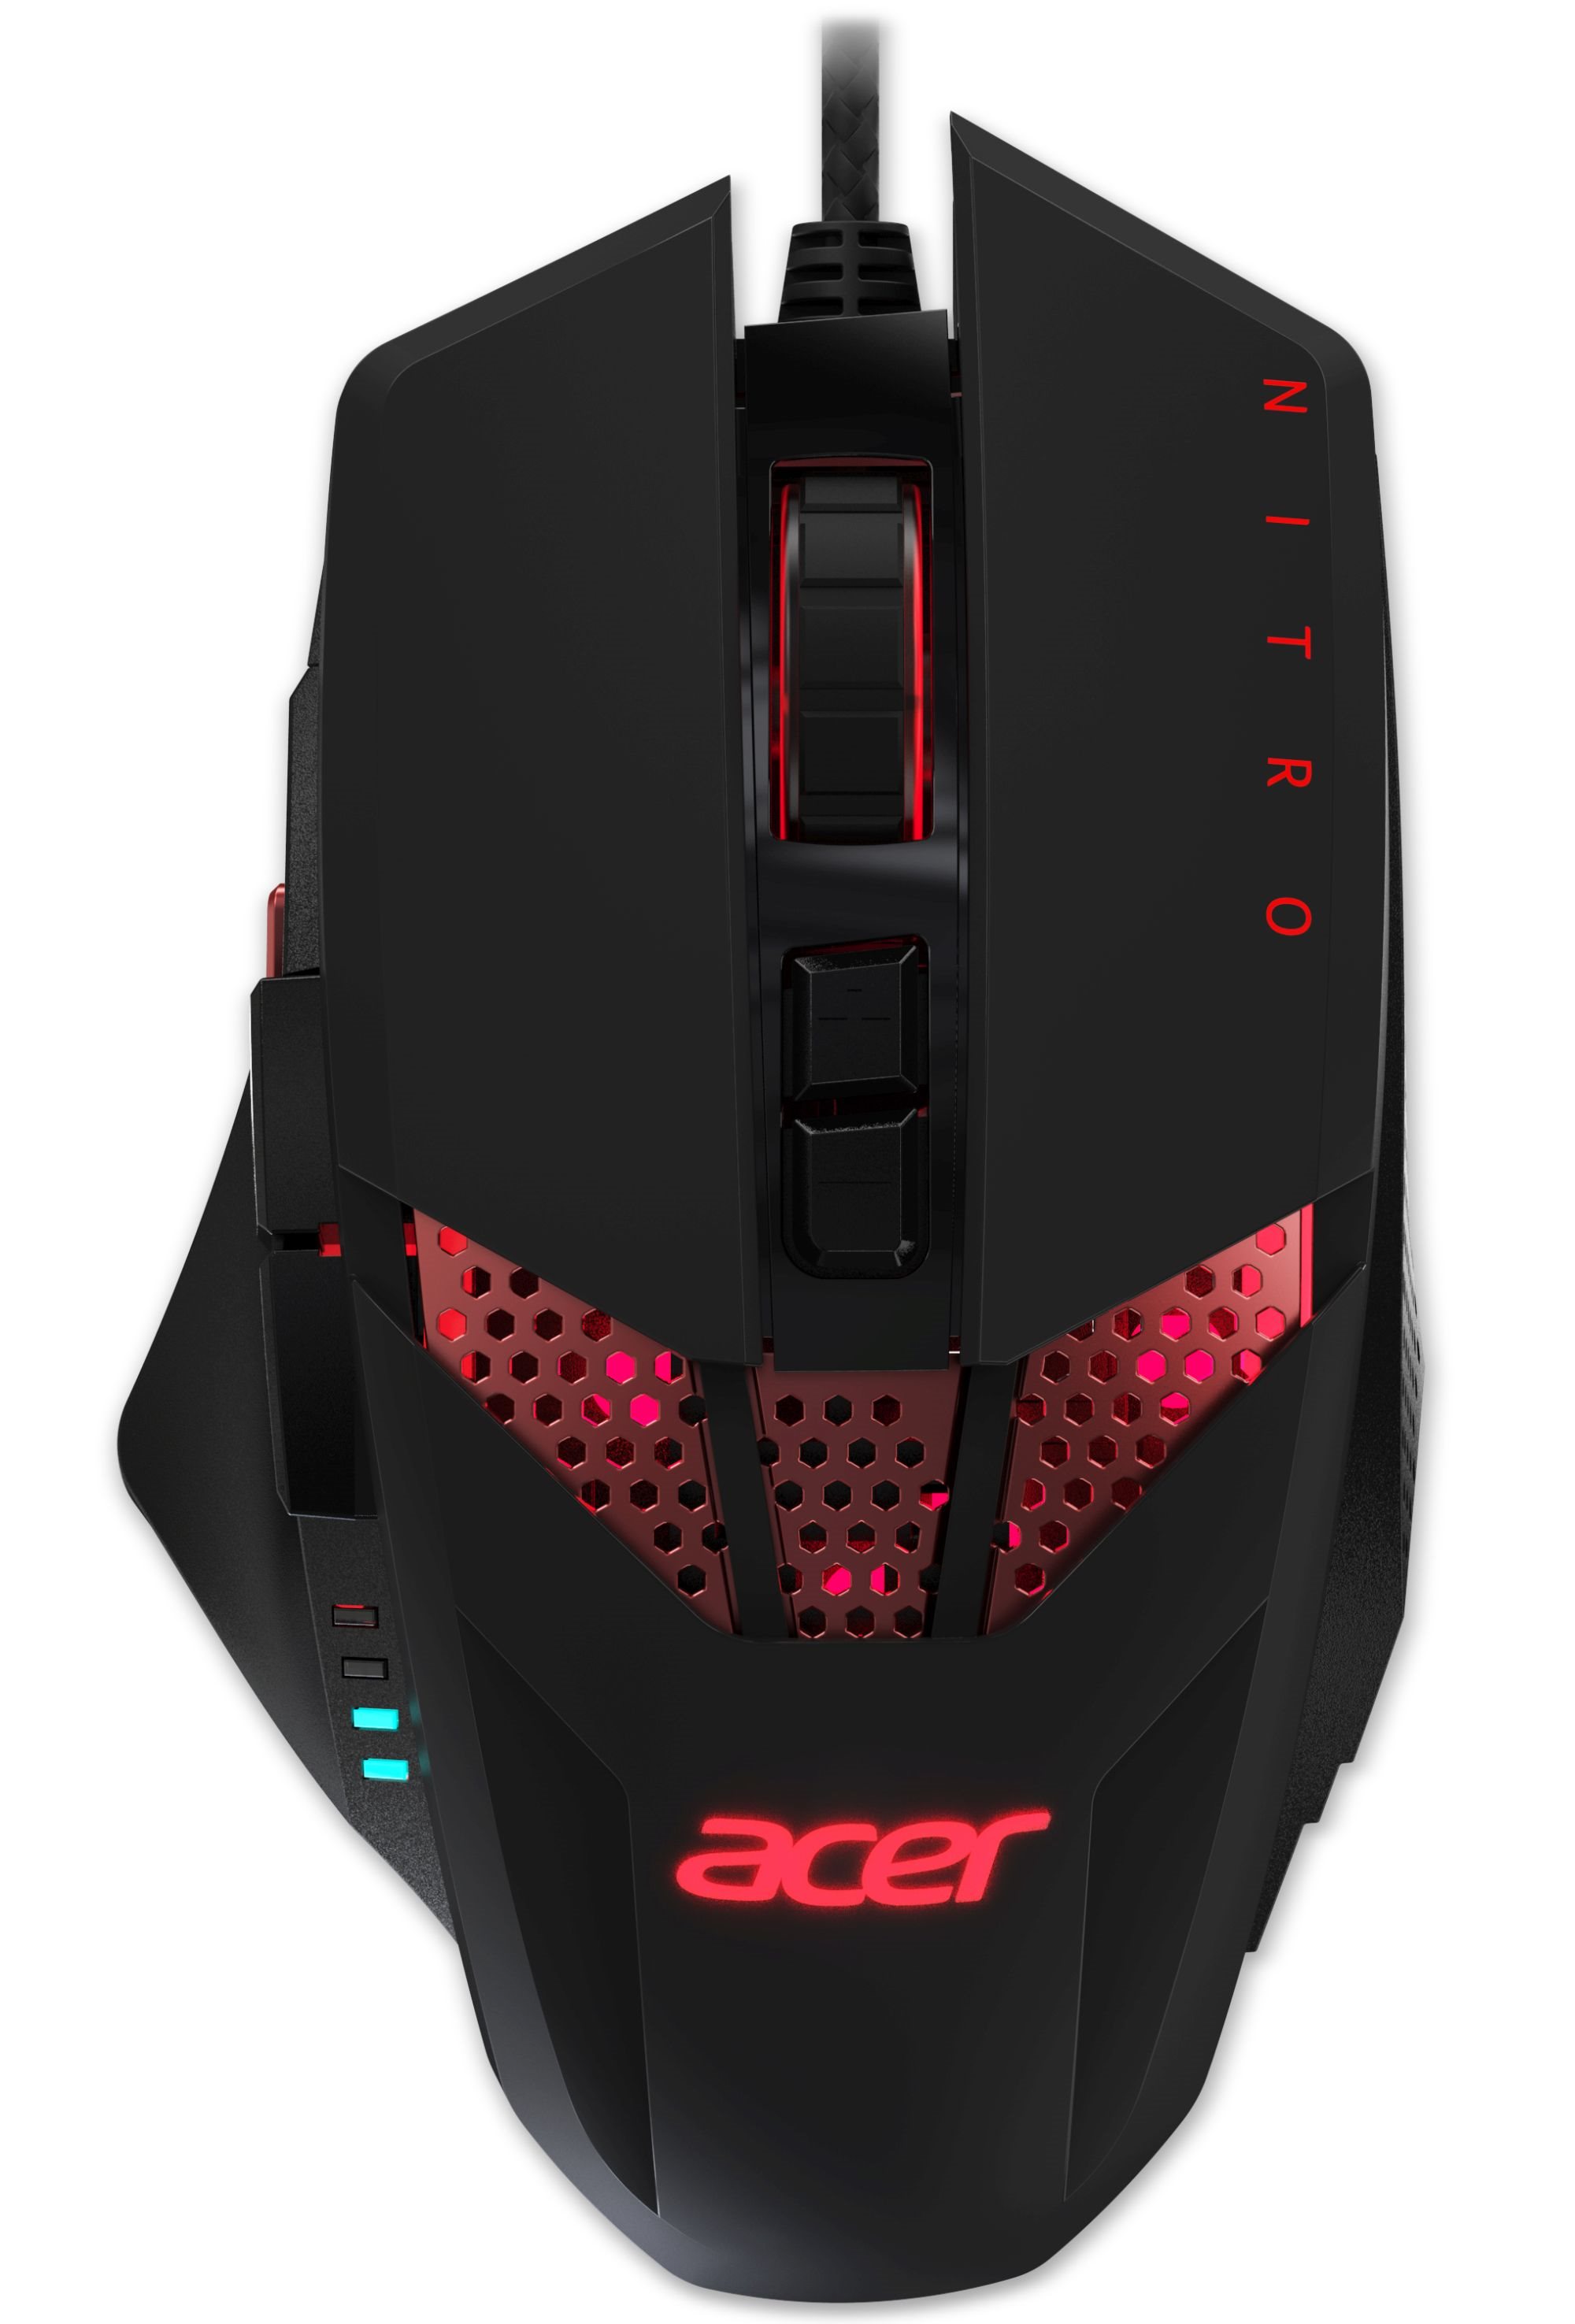 NITRO GAMING MOUSE - max. 4000dpi, 8 progr. buttons, 4 color backlight, acceleration 20g, wired (Retail pack)